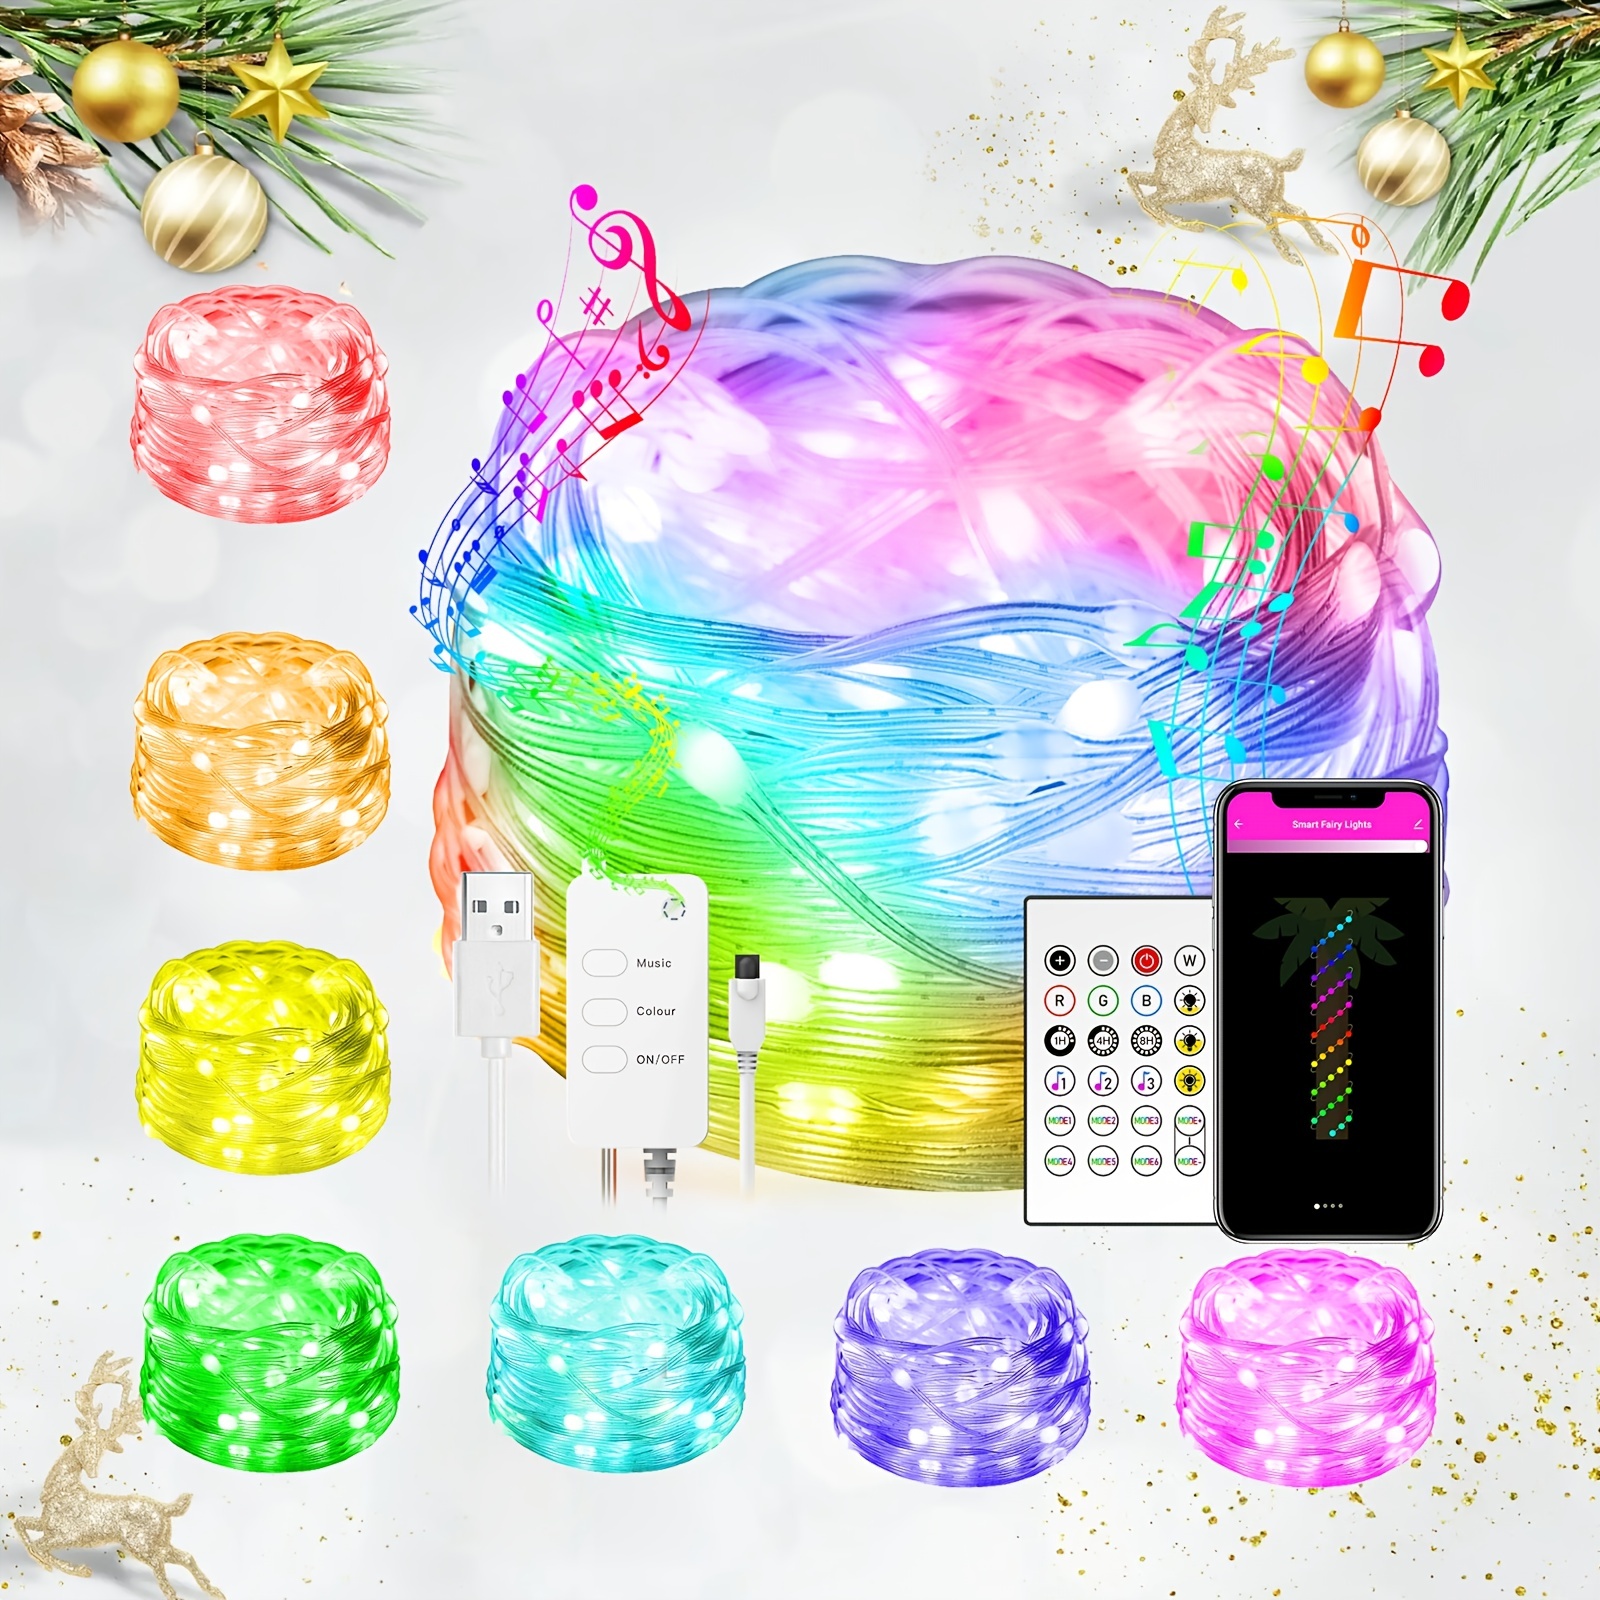 MagicLight 33ft RGB WiFi Strip Light, Smart APP Control Color Chaning Music  LED Light Strip for Bedroom, Party, Living Room, Smart LED Rope Light  Compatible with Alexa Google Assistant 